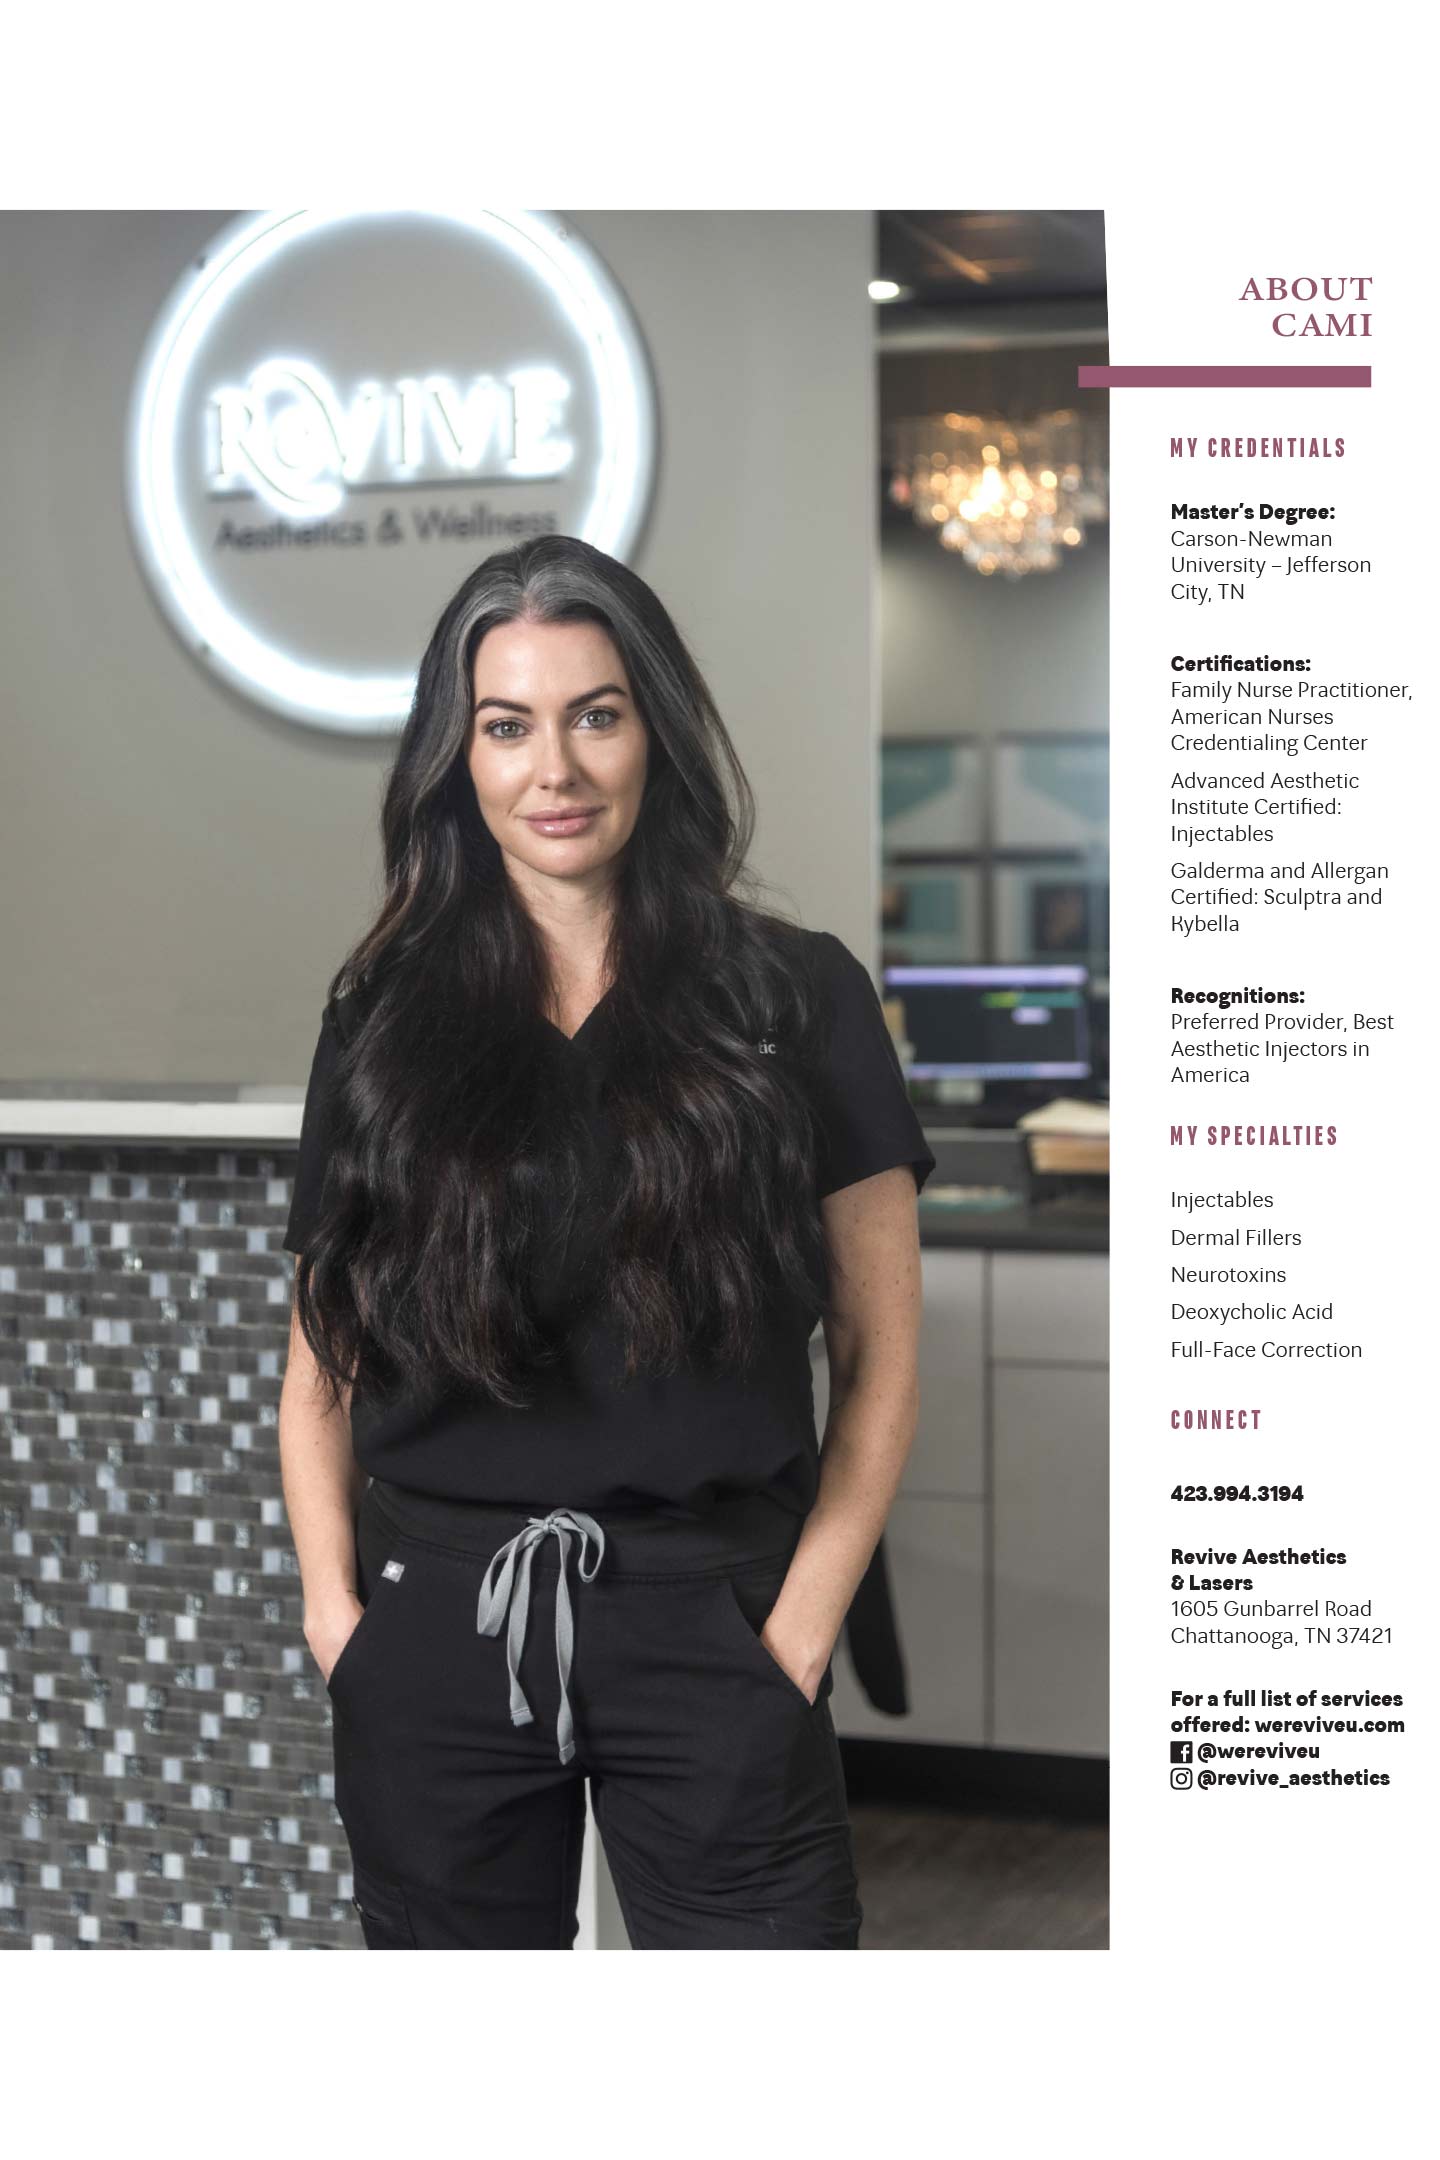 About Cami Killom, NP at Revive Aesthetics & Lasers